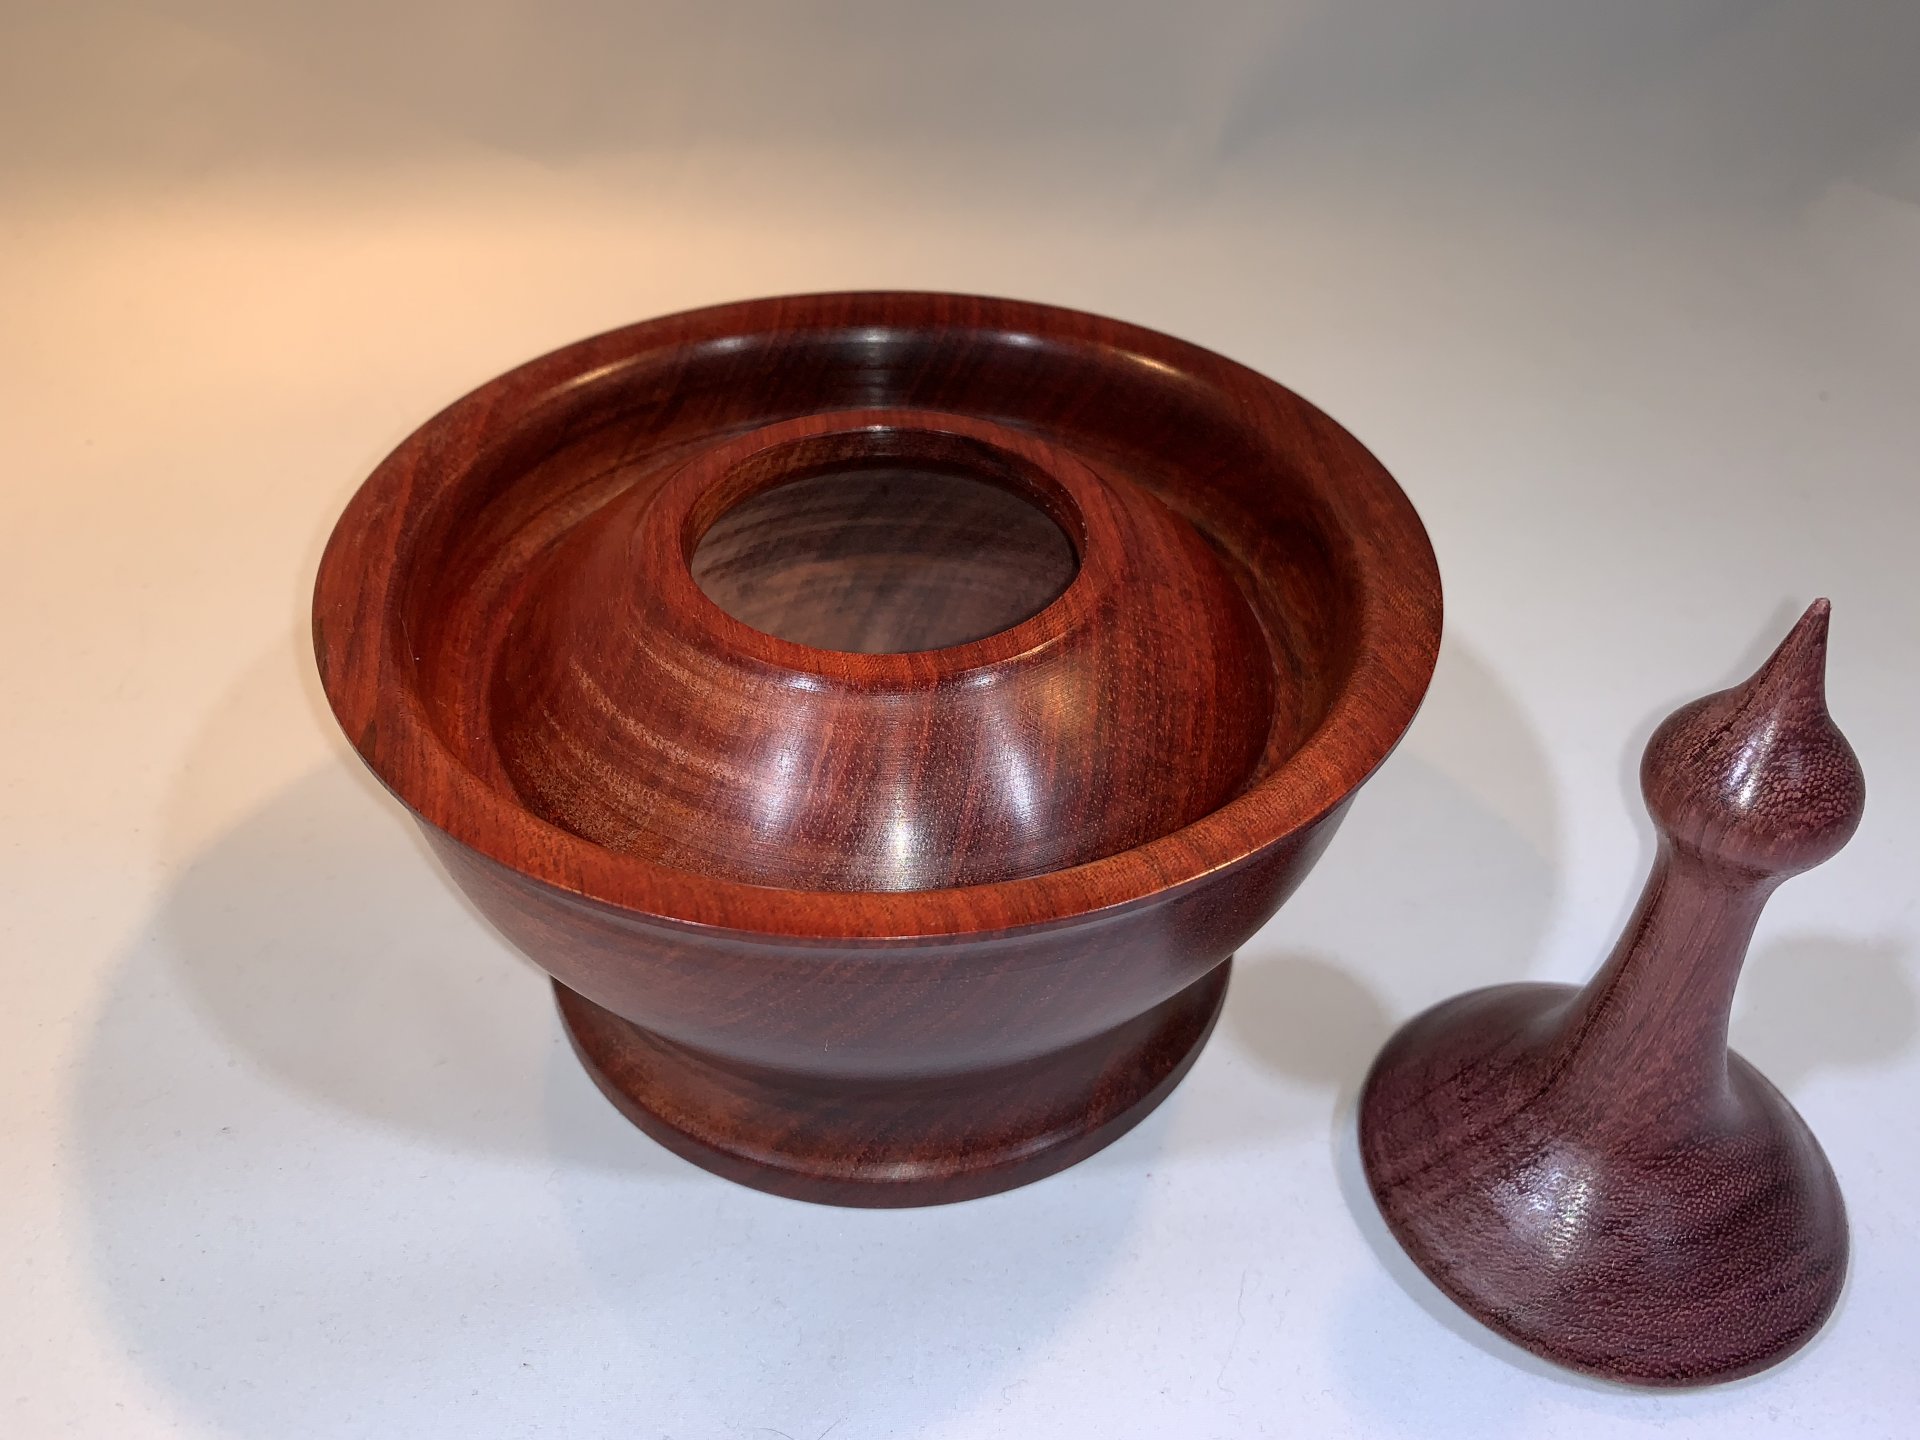 Lidded vessel made from Bloodwood and finial made from Purple Heart - Pic2